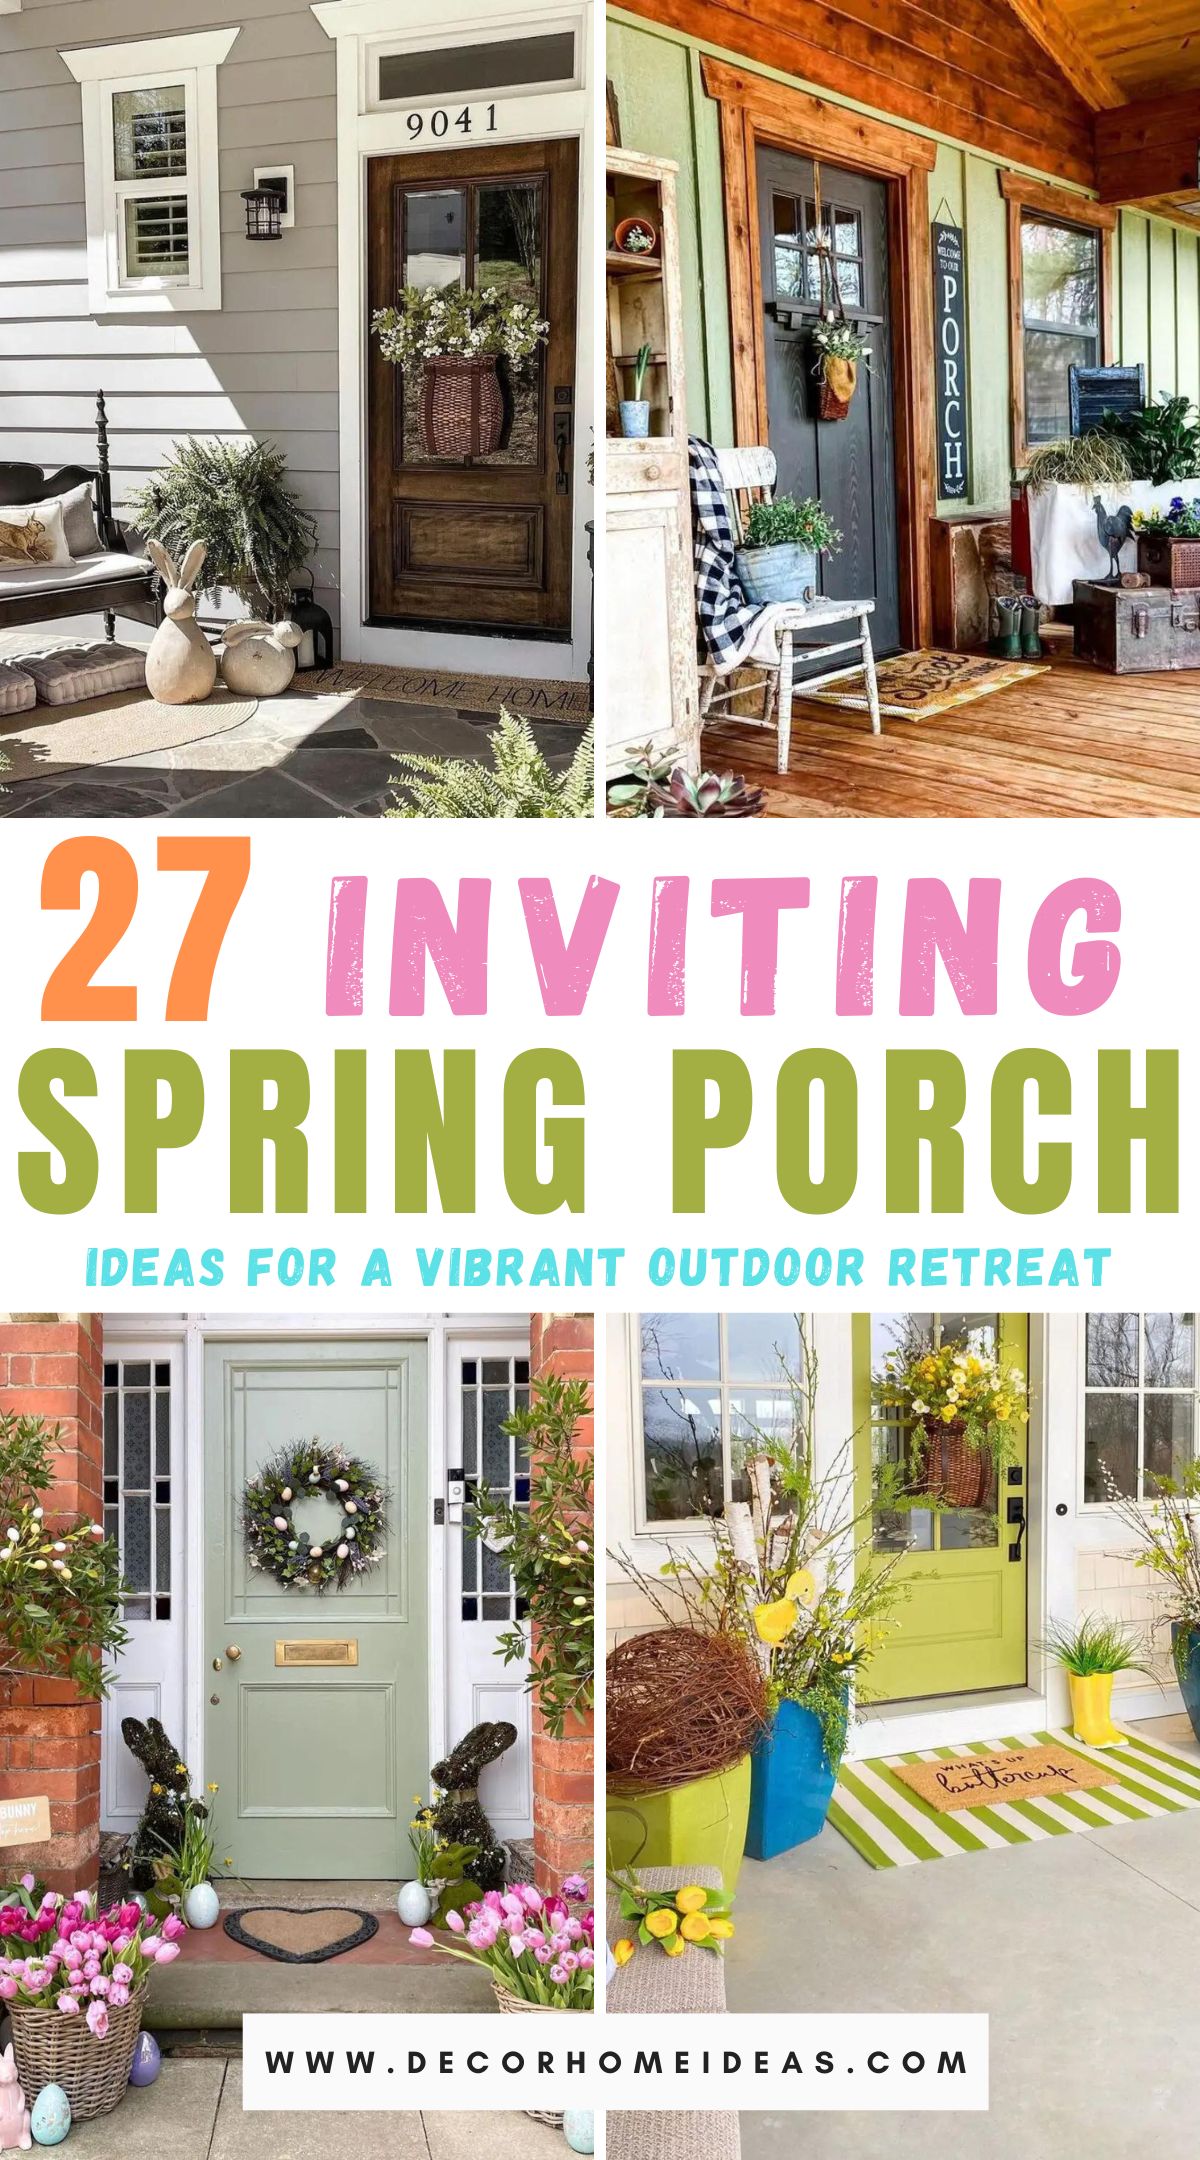 Welcome the season of renewal with our collection of 27 inviting spring porch ideas. From colorful decor to cozy furnishings, discover inspirations to transform your porch into a vibrant outdoor retreat that beckons you to bask in the beauty of spring.